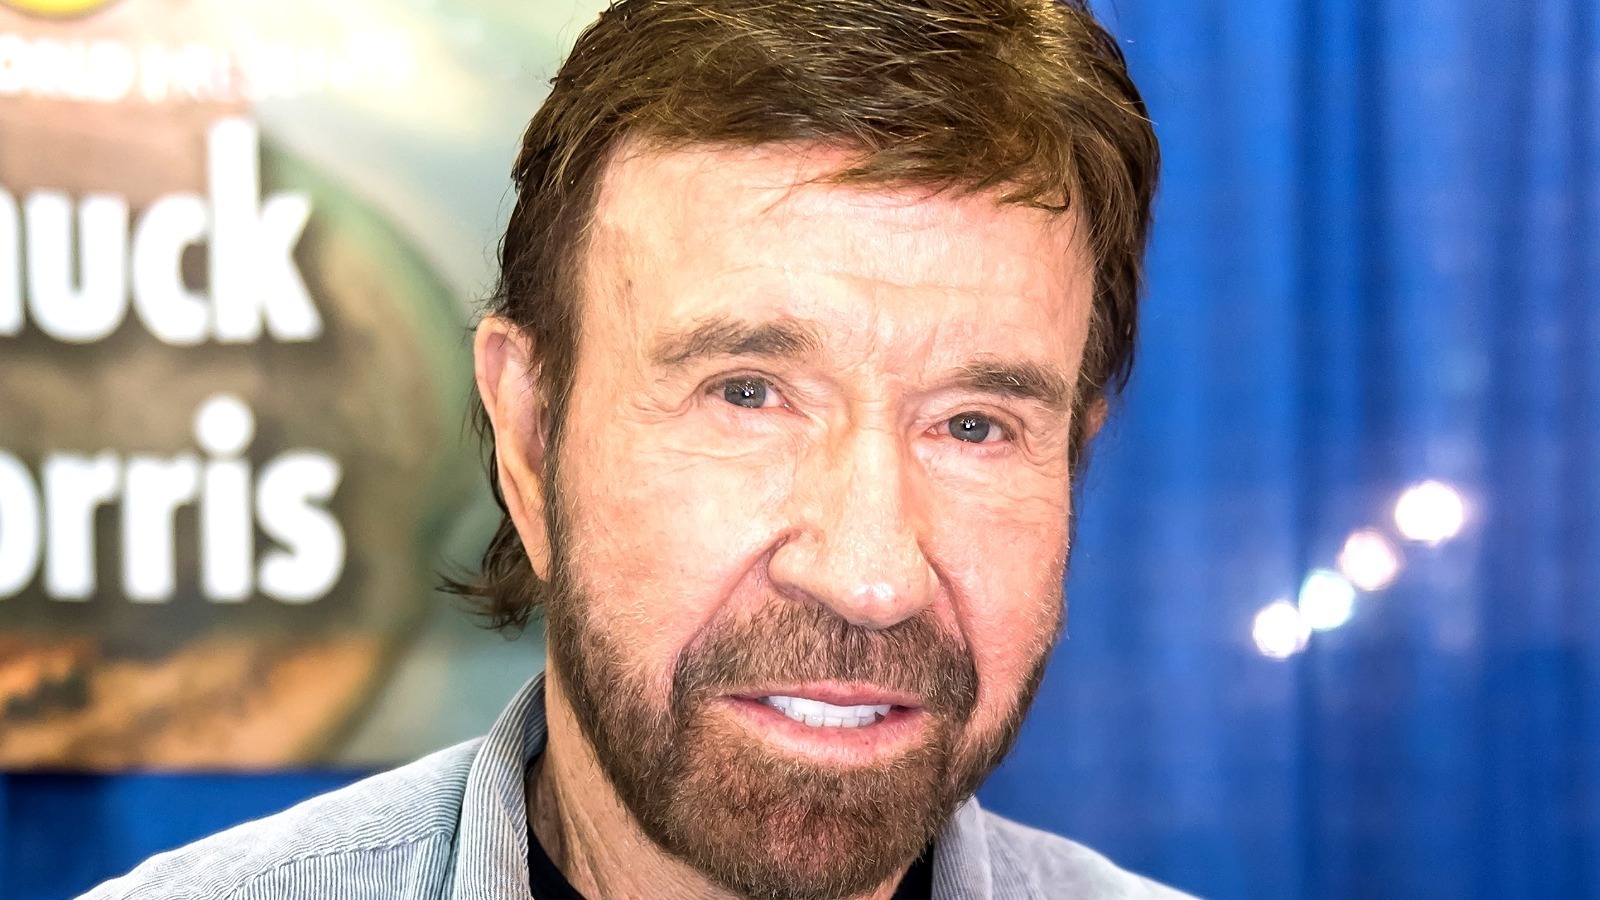 The Real Reason Chuck Norris Hasn't Been In A Movie Since 2012